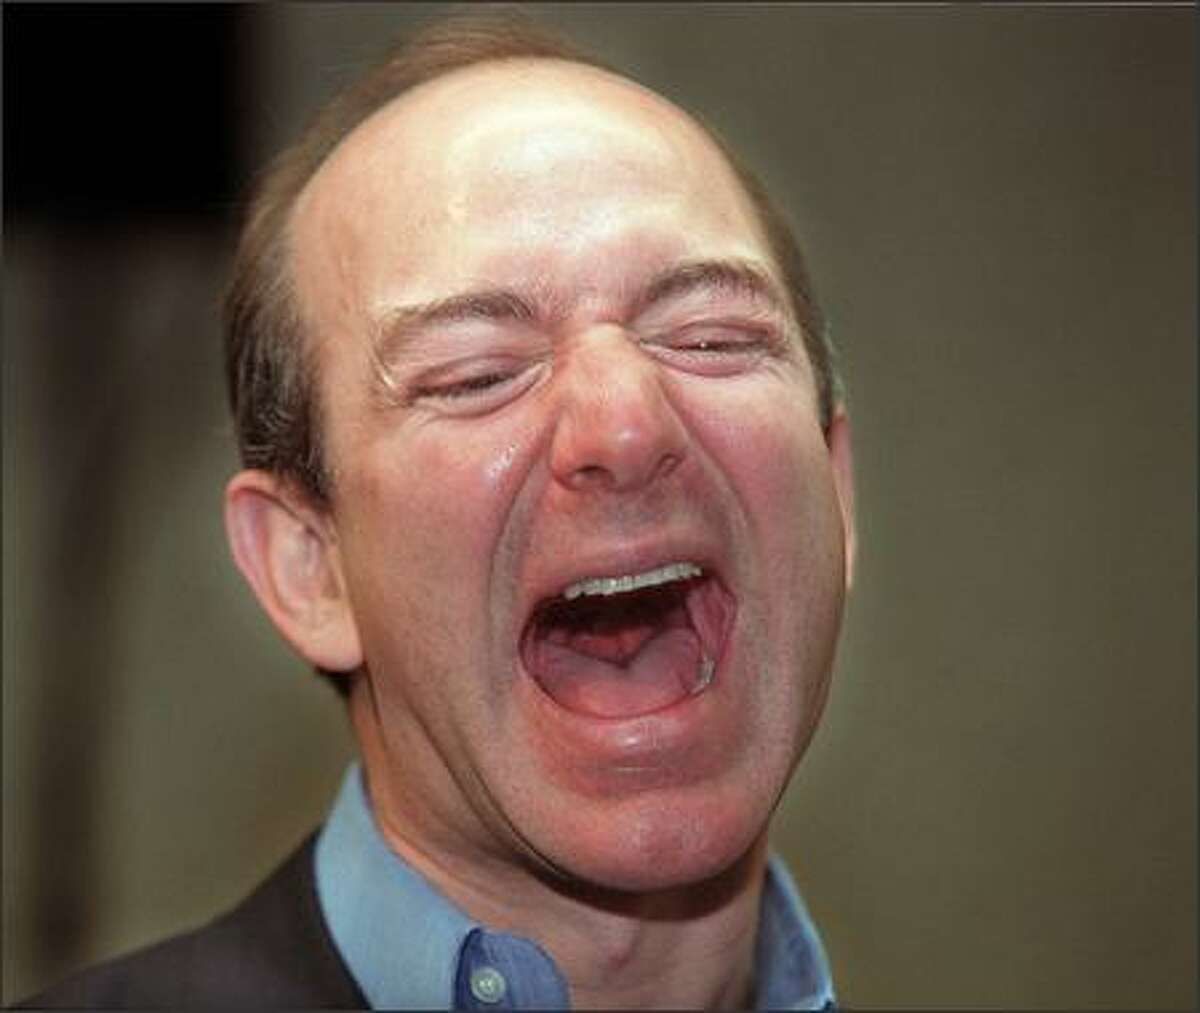 Jeff Bezos, chairman of Amazon.com, delivers his trademark laugh after the annual shareholders meeting.